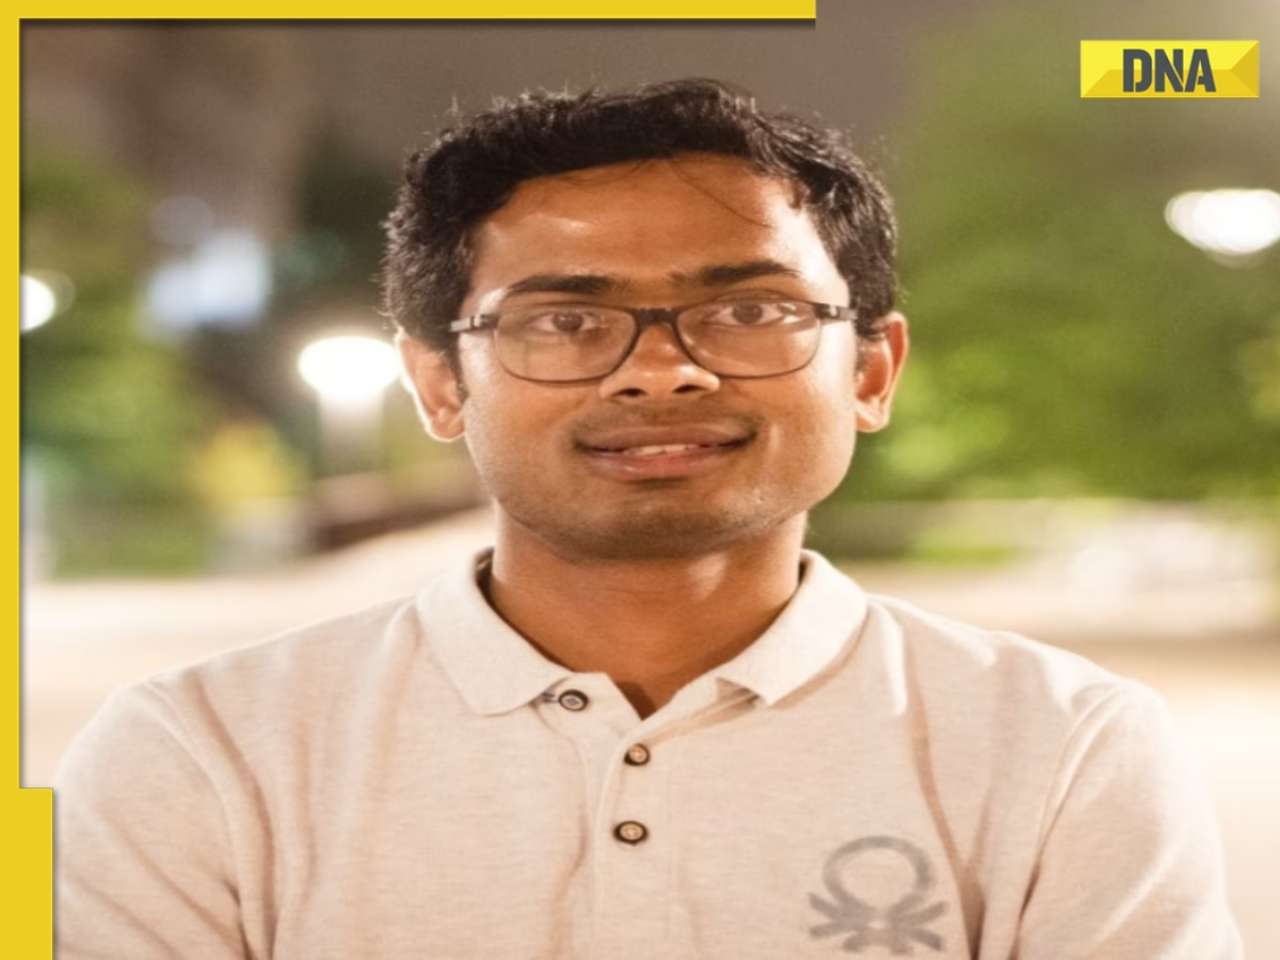 Meet Indian genius who passed IIT JEE exam at 13, went to IIT Kanpur, did PhD at 24, is now working as..